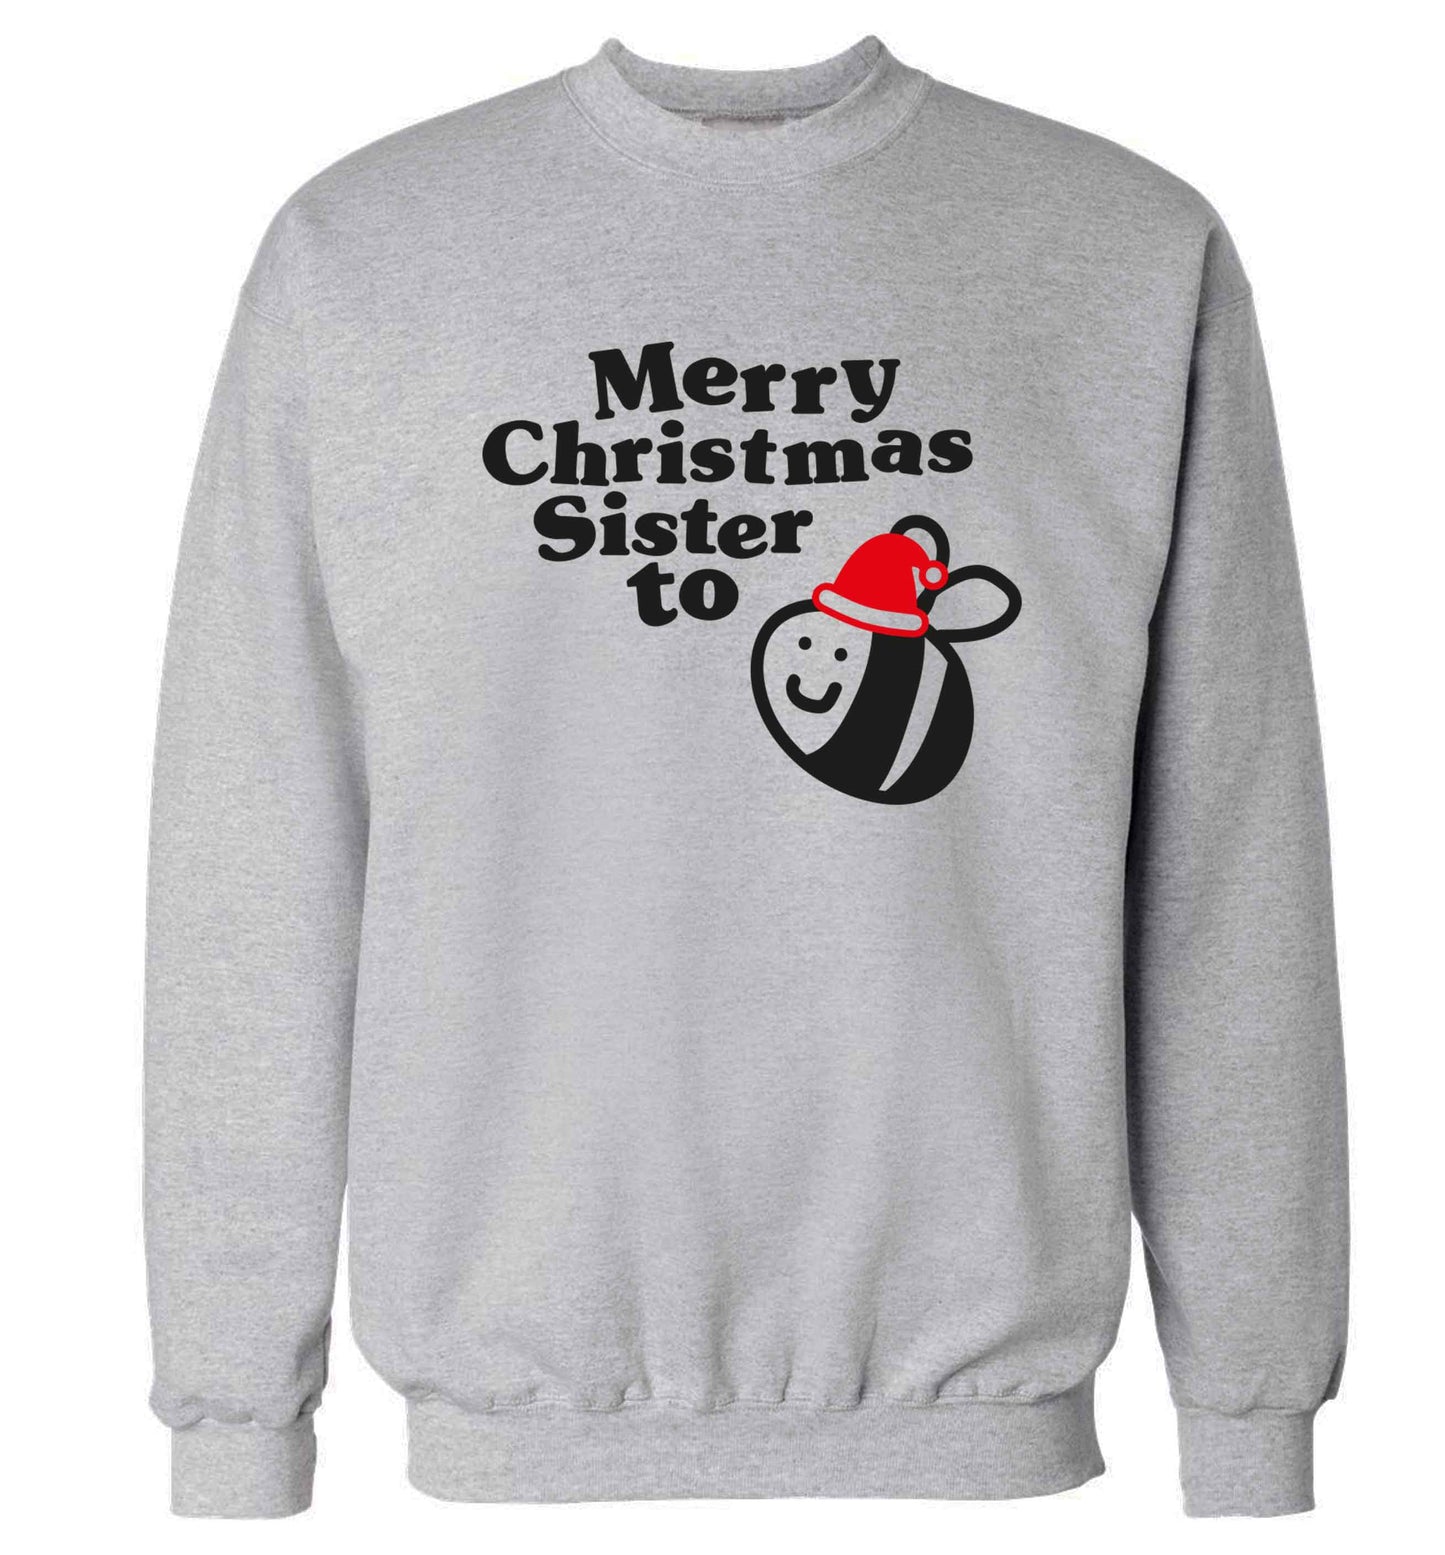 Merry Christmas sister to be Adult's unisex grey Sweater 2XL